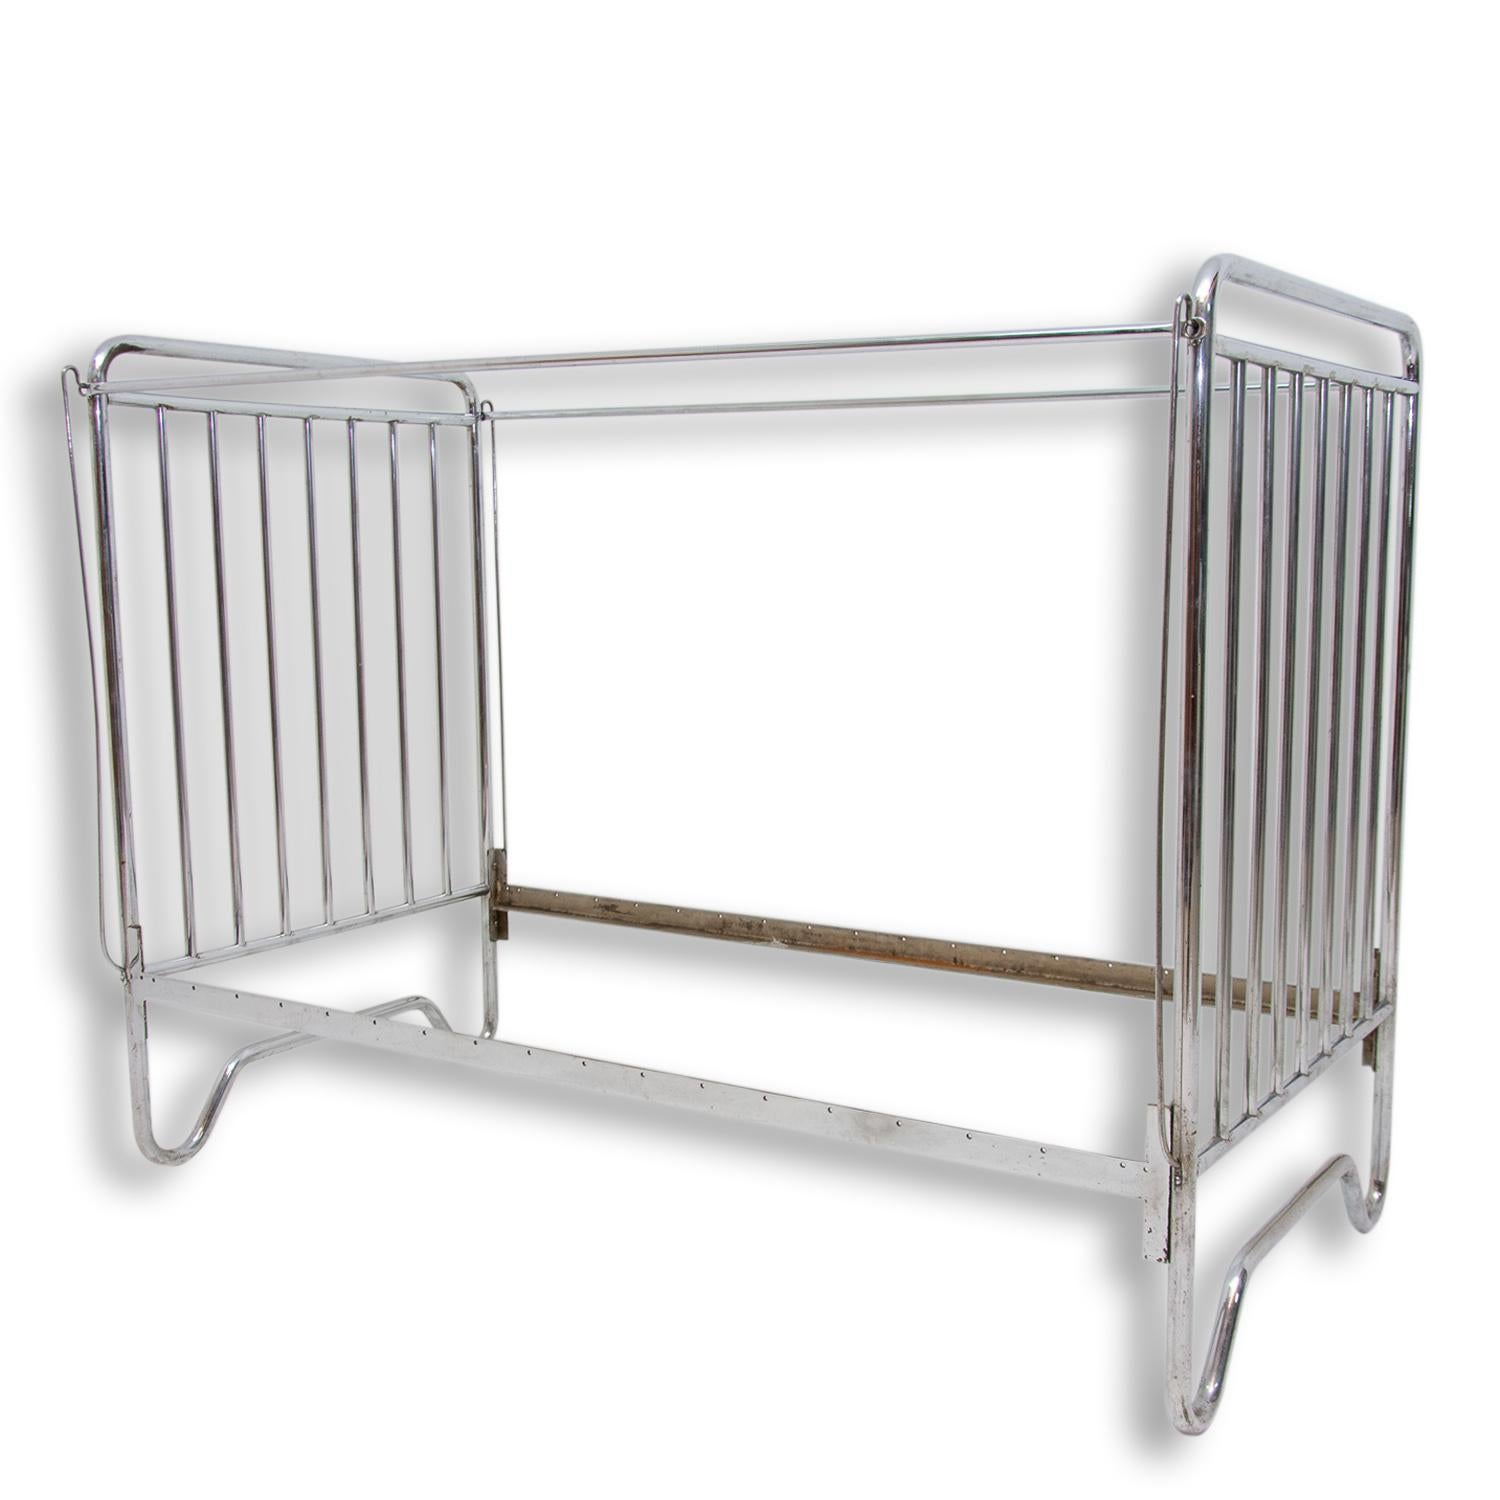 Chromium Plated Childern Bed, Bauhaus Period, 1930s For Sale 2